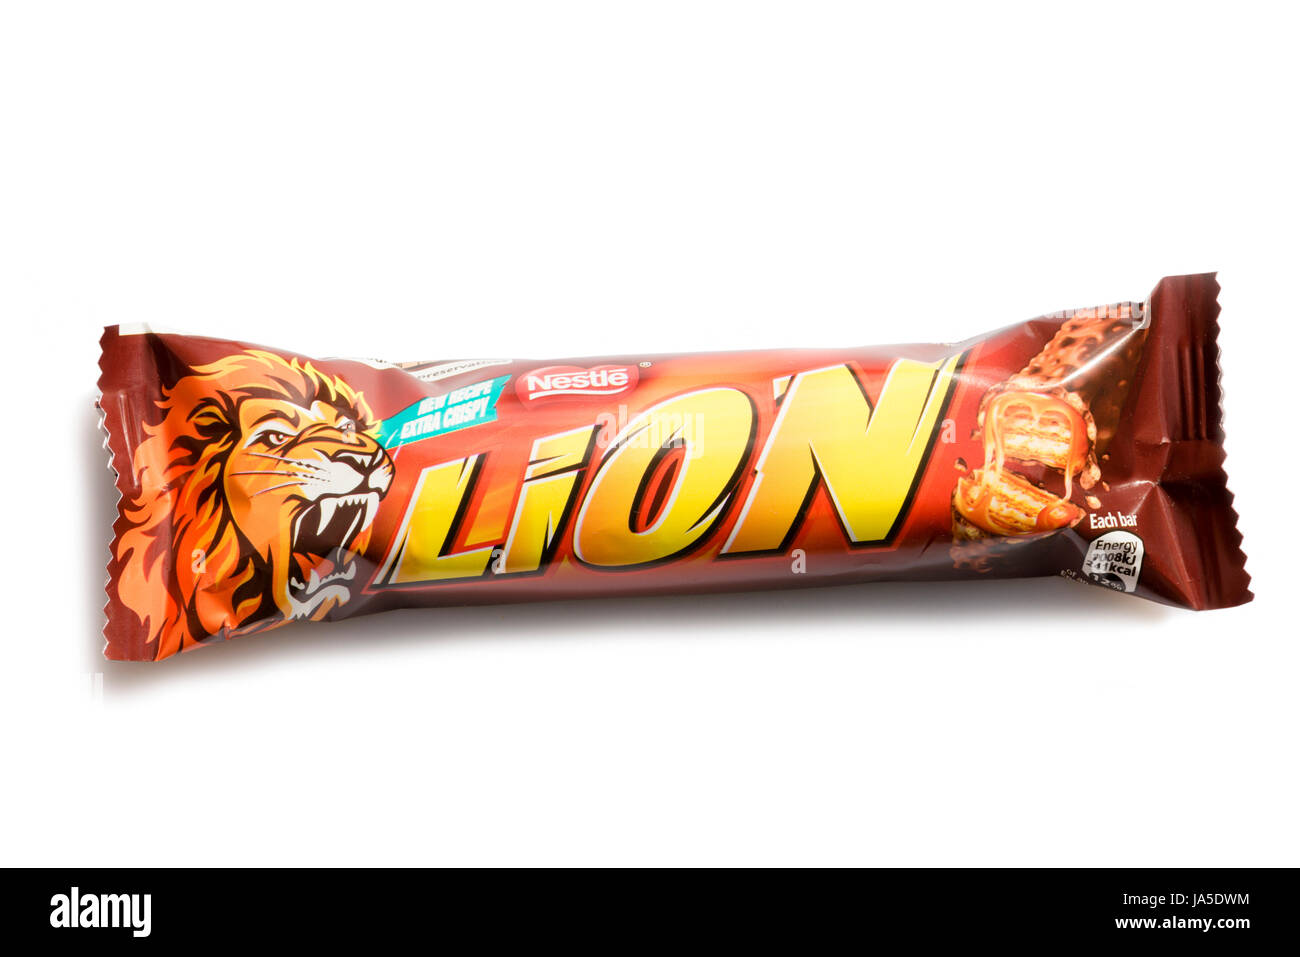 Nestle Lion bar, cut out or isolated against a white background. Stock Photo